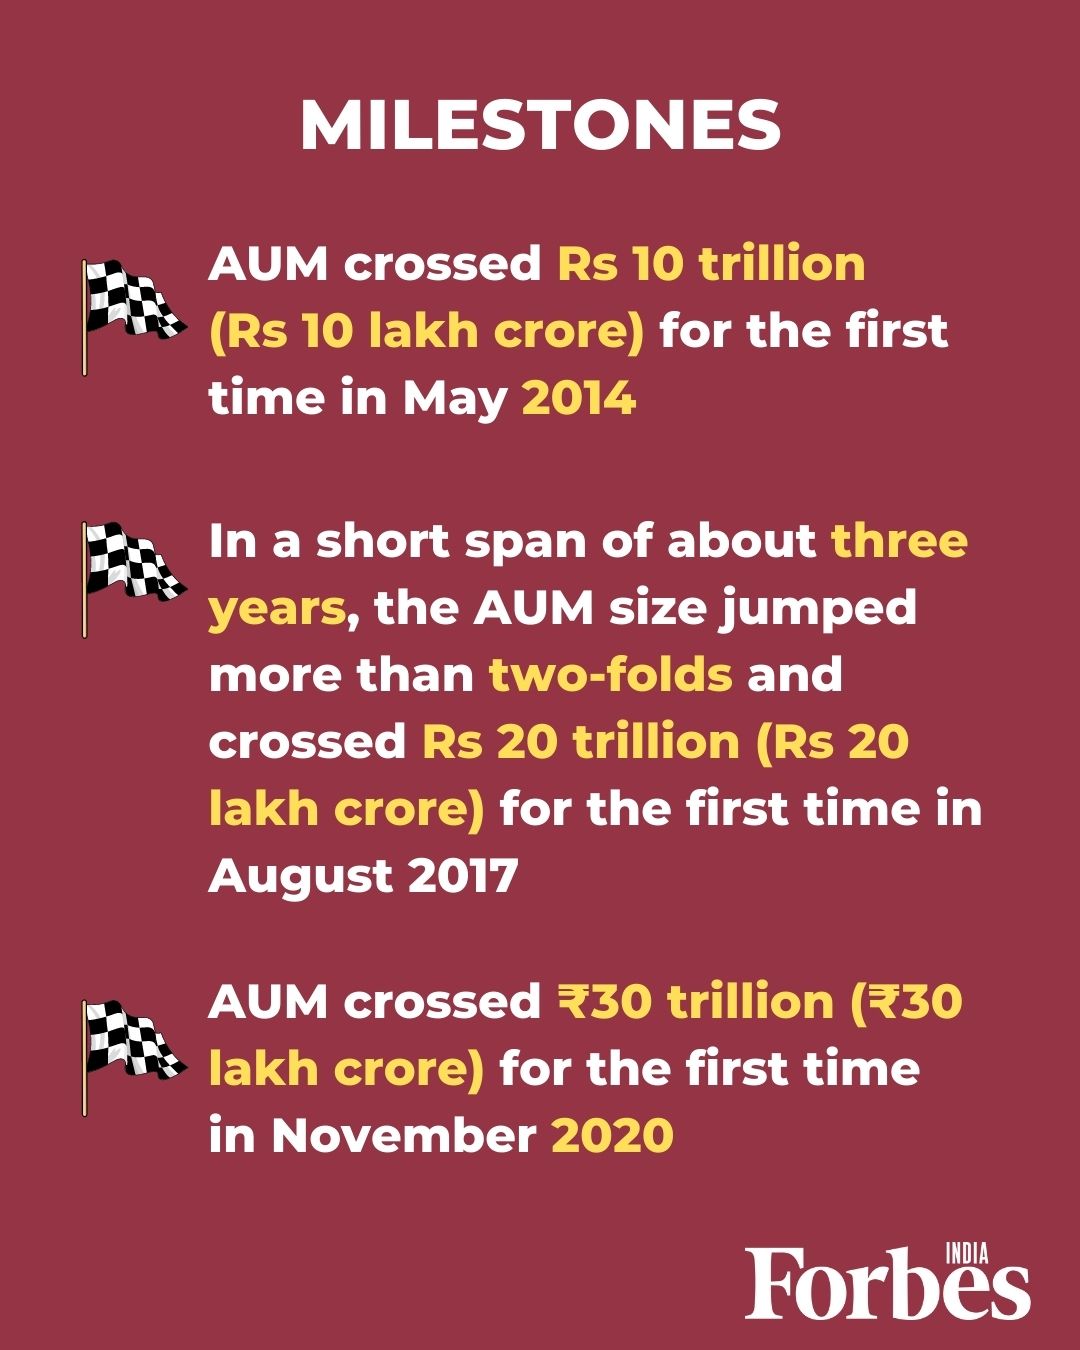 Indian mutual funds' AUM jumps five-fold in 10 years to Rs 37.33 lakh crore in 2021